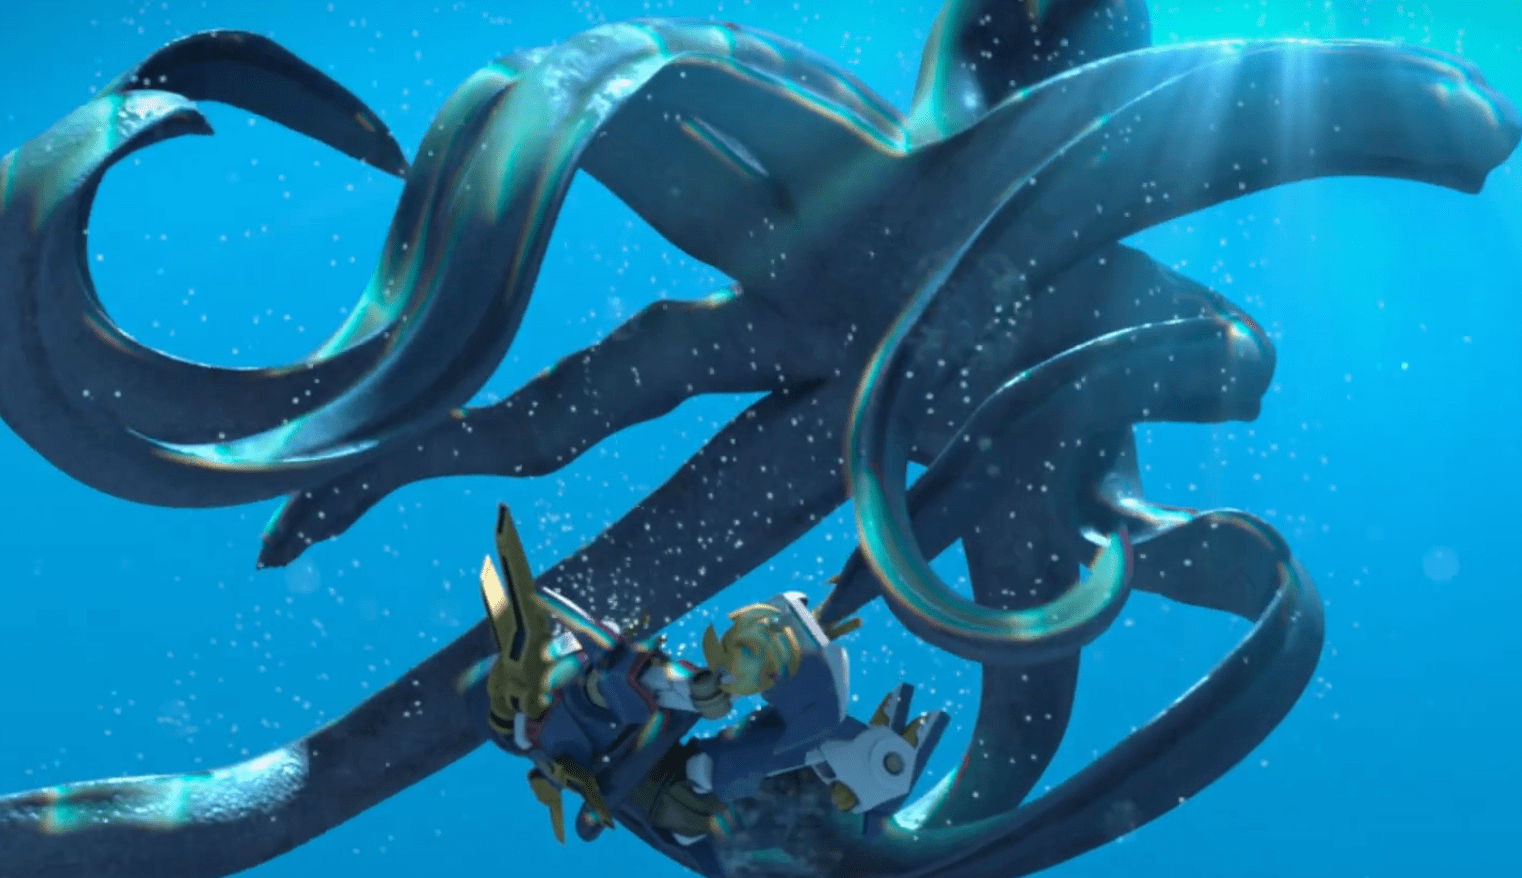 https://static.wikia.nocookie.net/ninjago/images/9/93/Large_octopus.png/revision/latest?cb=20210717022217